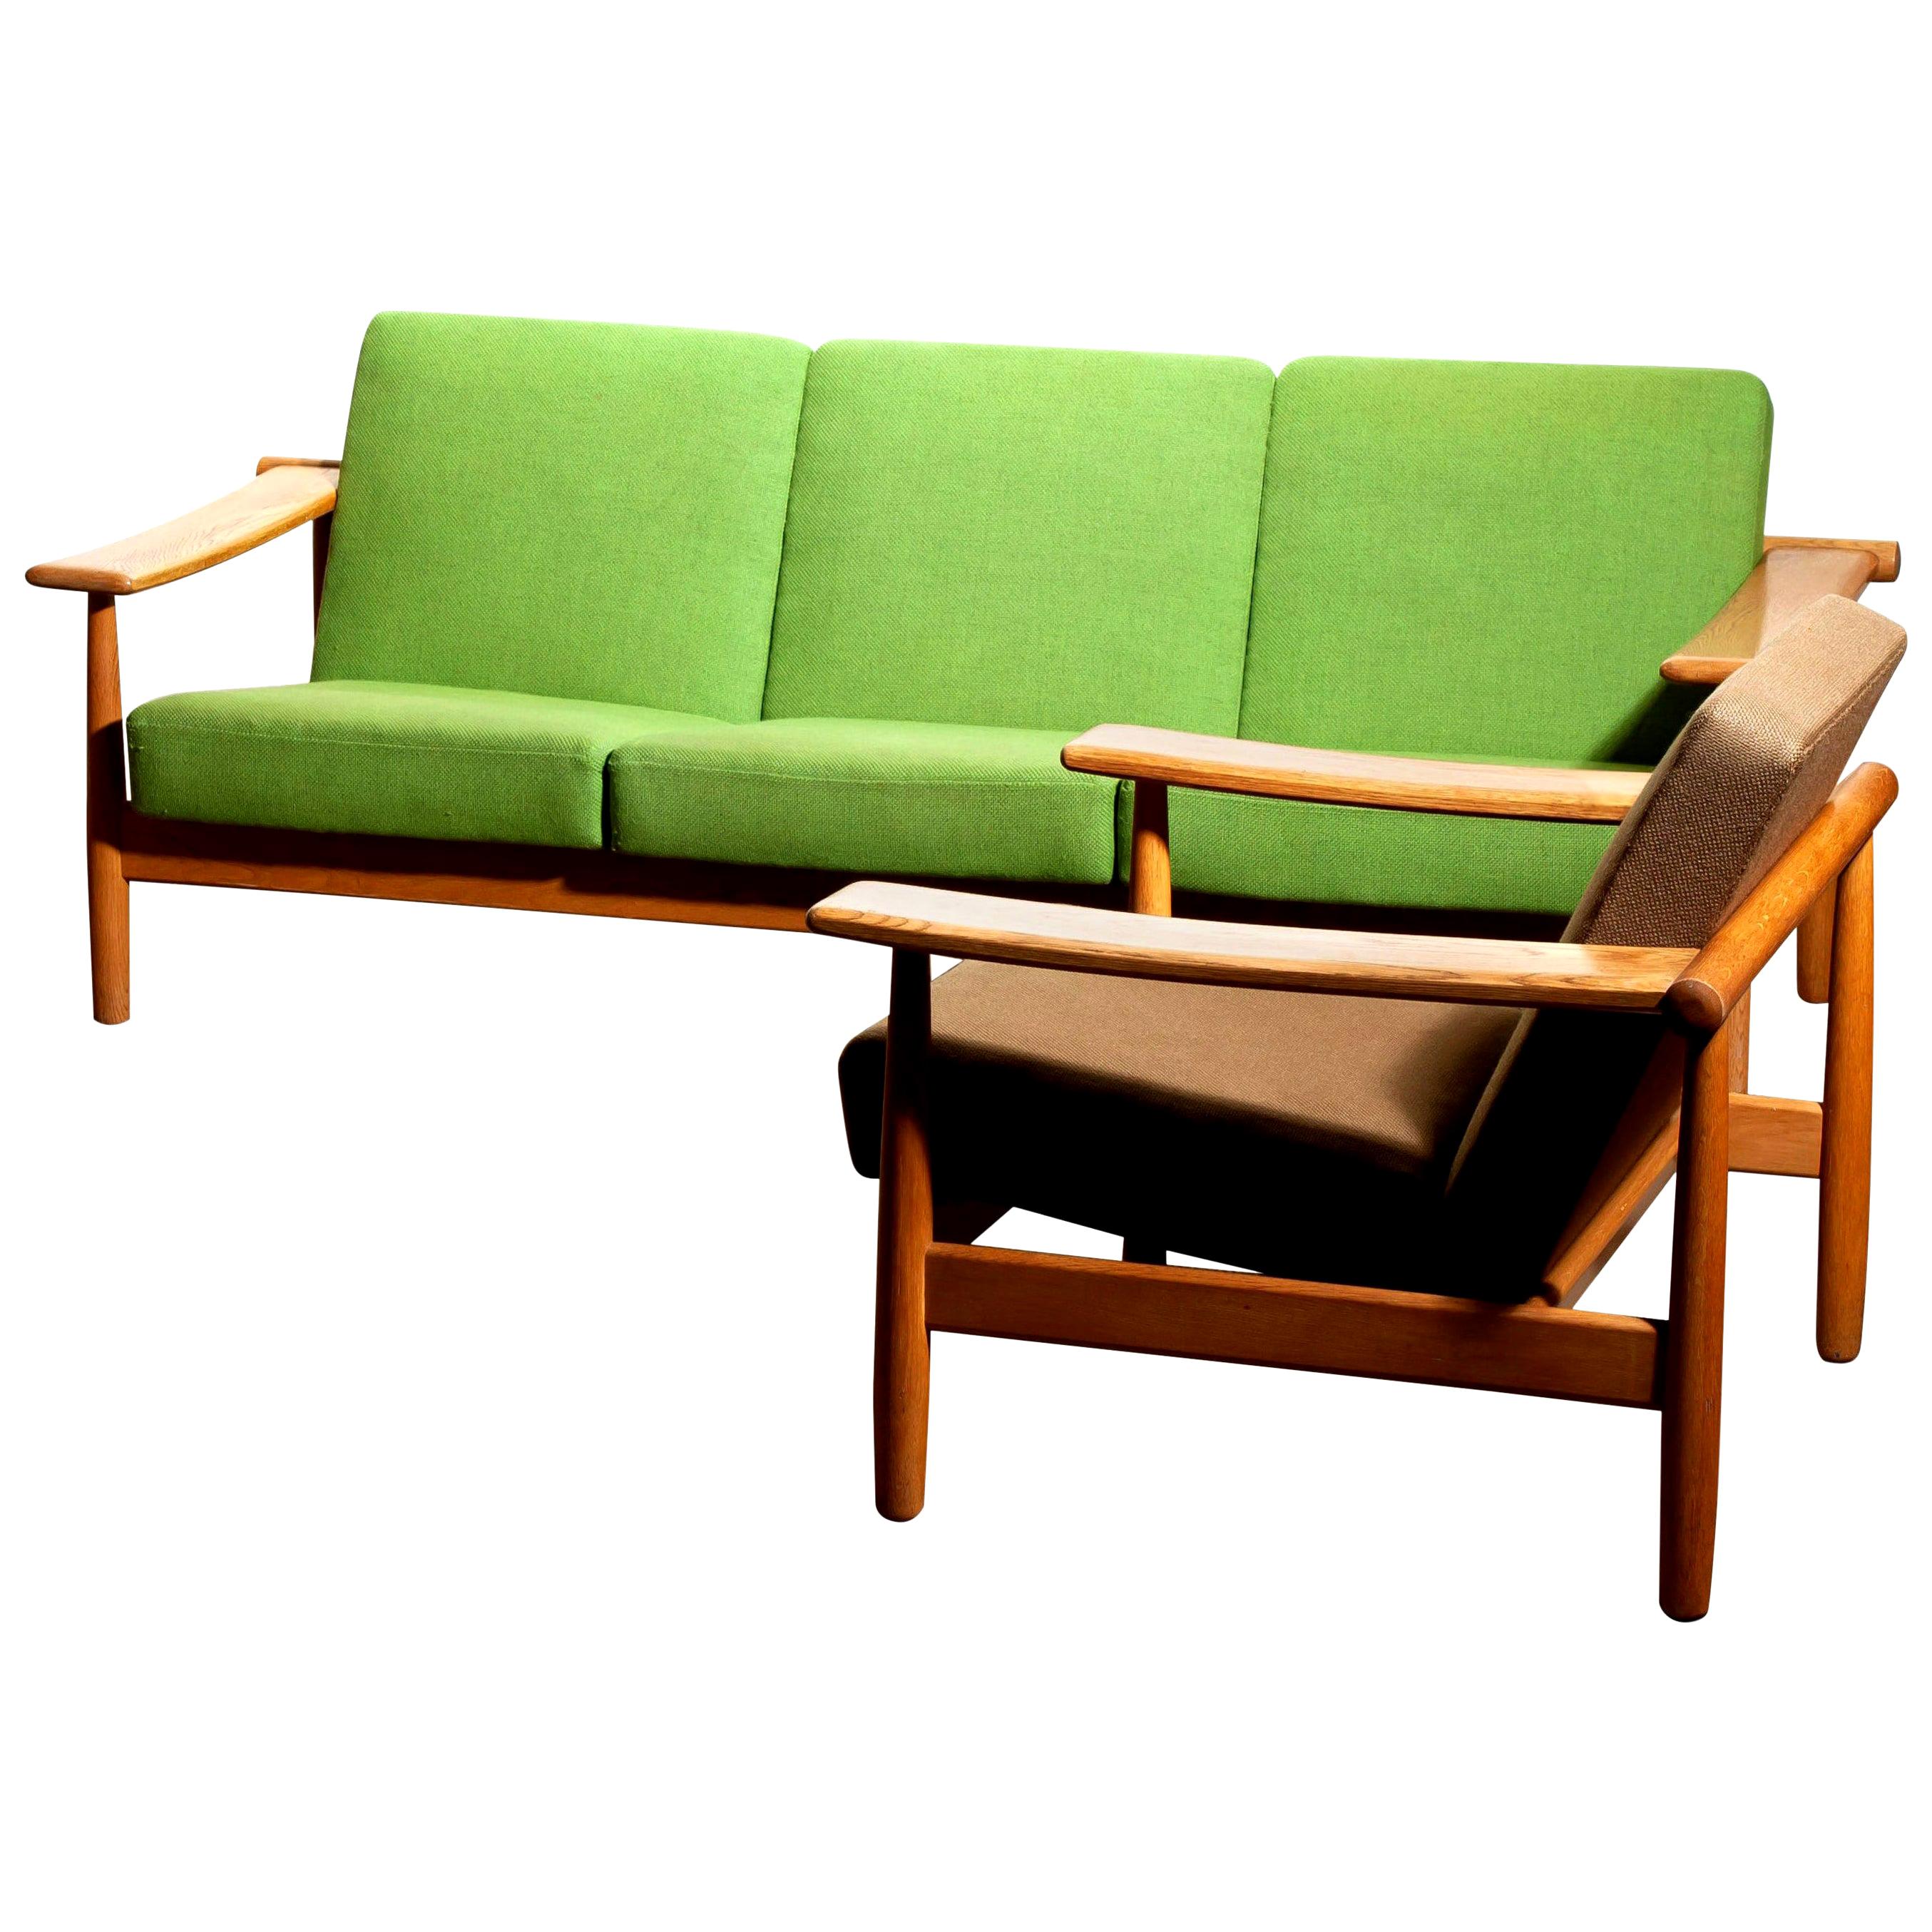 1960s, Oak Sofa and Lounge Chair or Living Room Set from Denmark